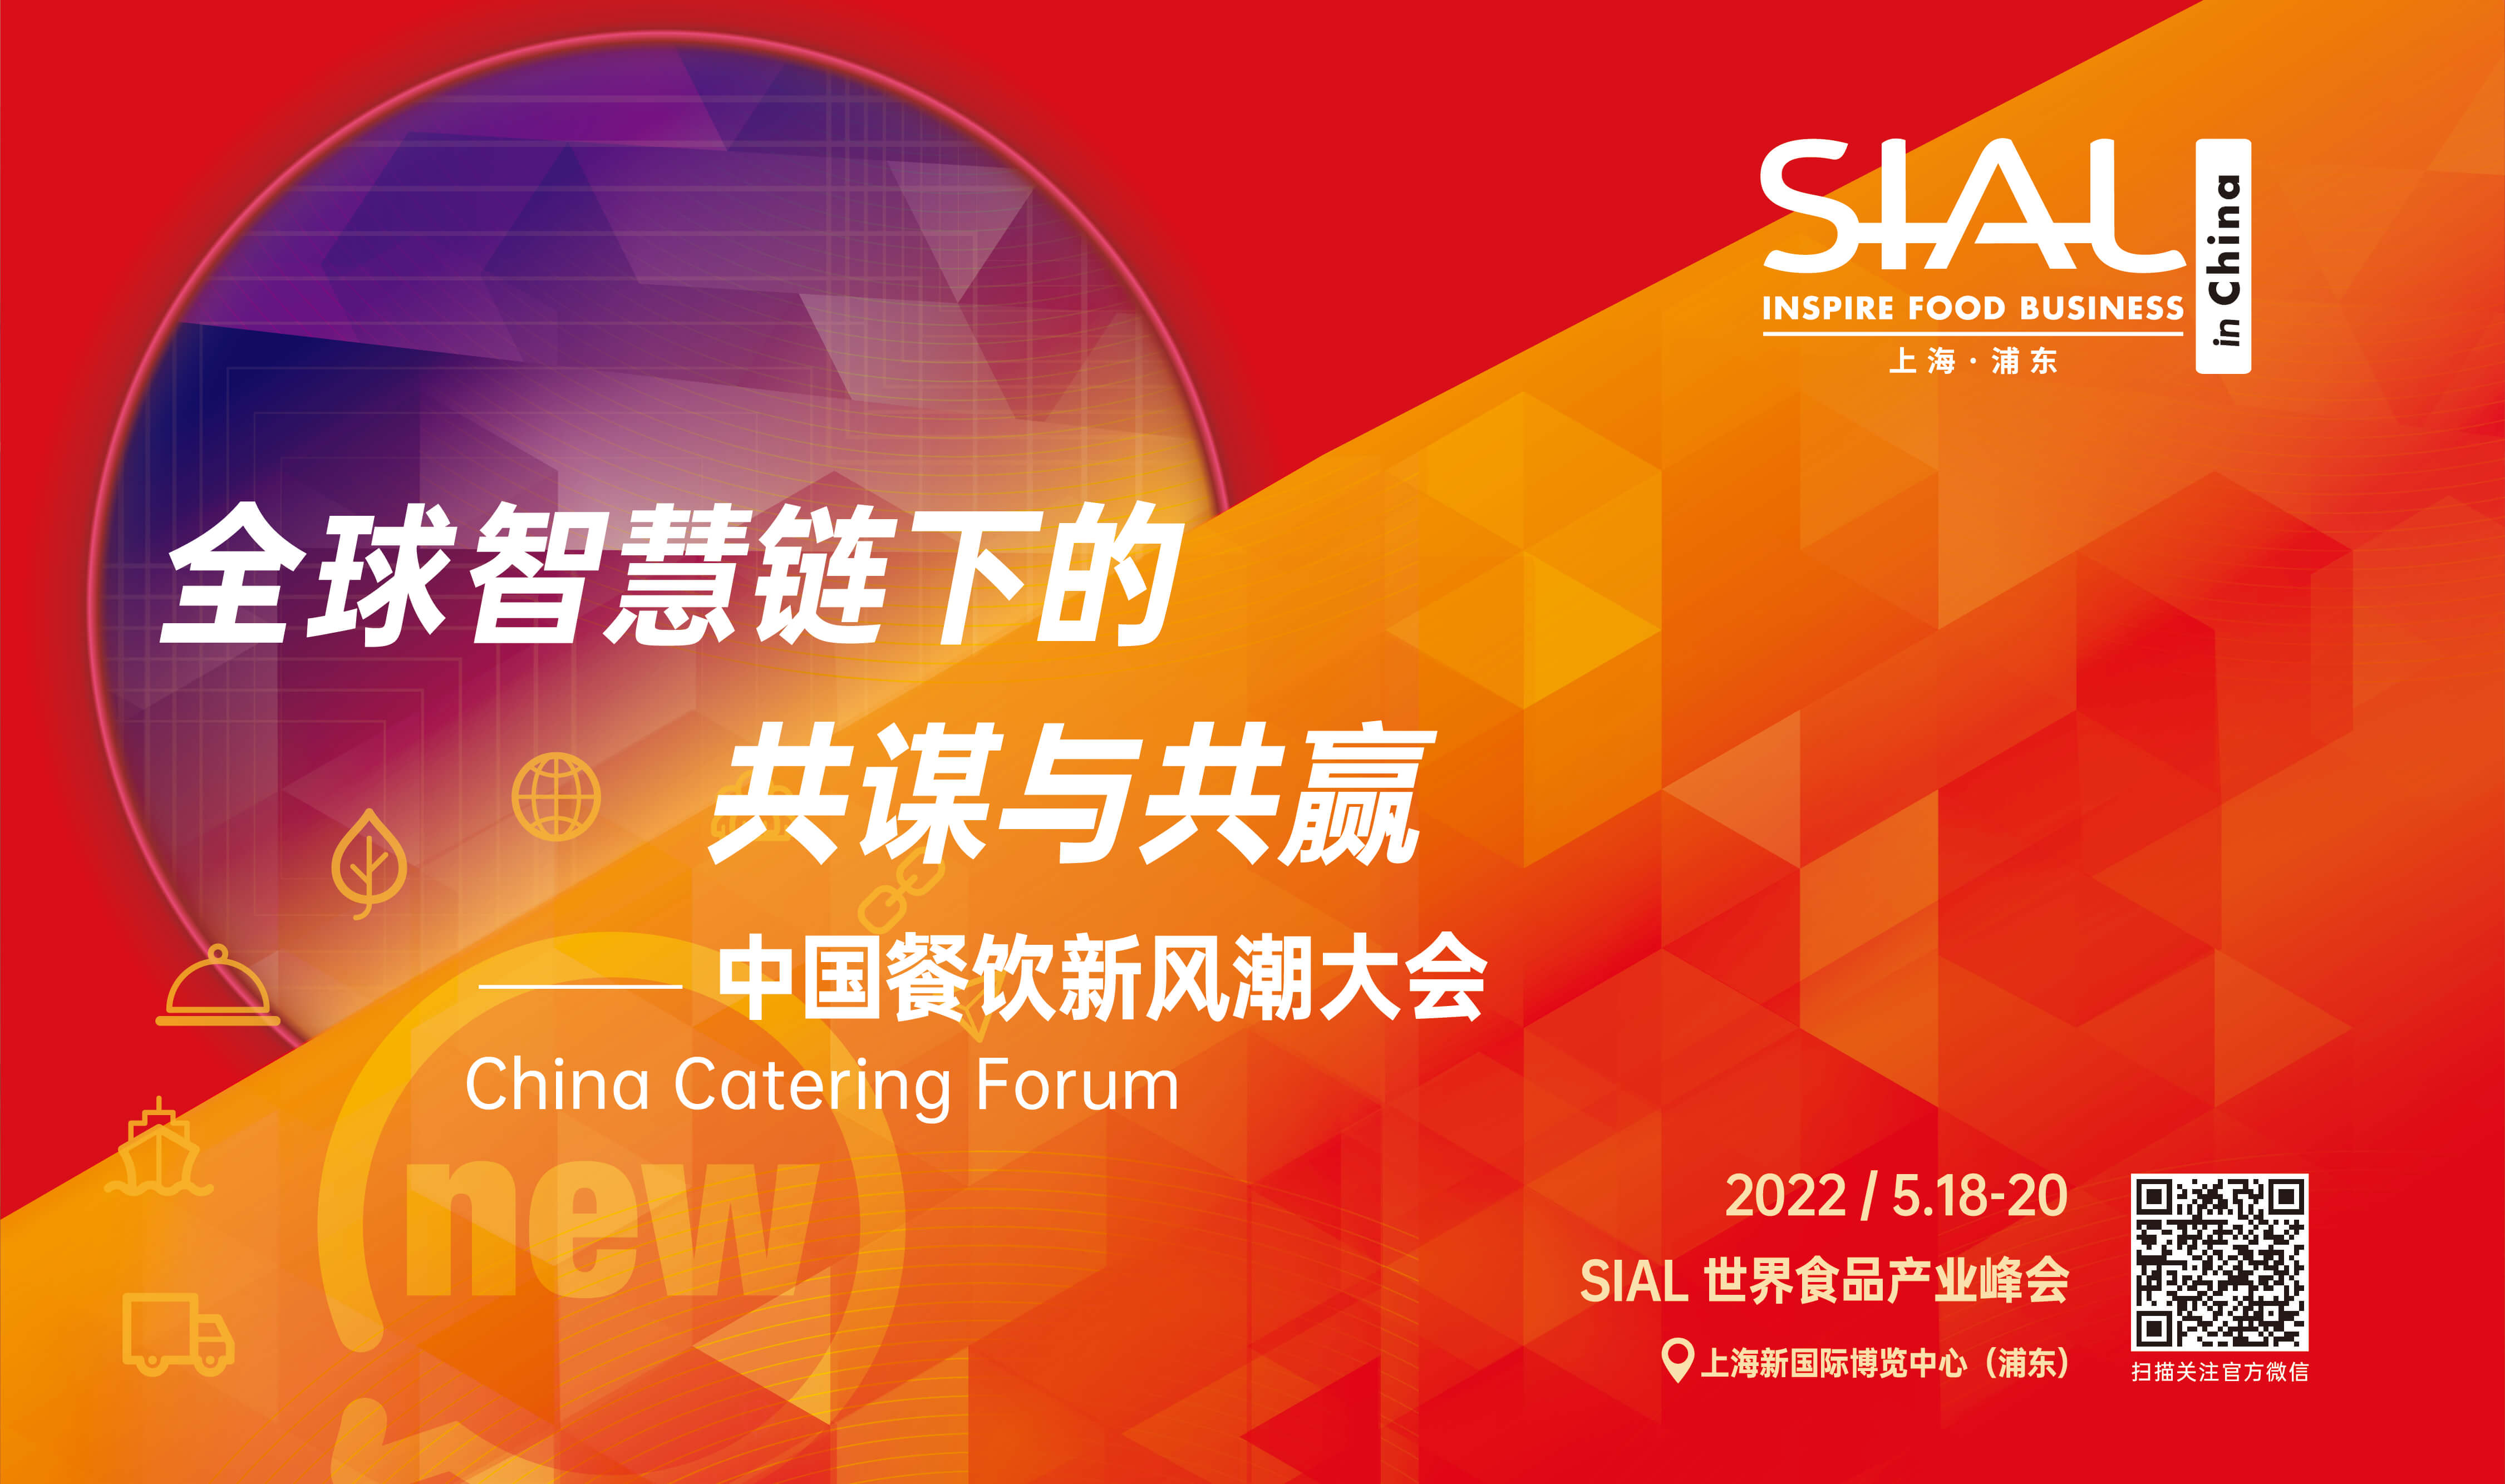 China Catering Forum